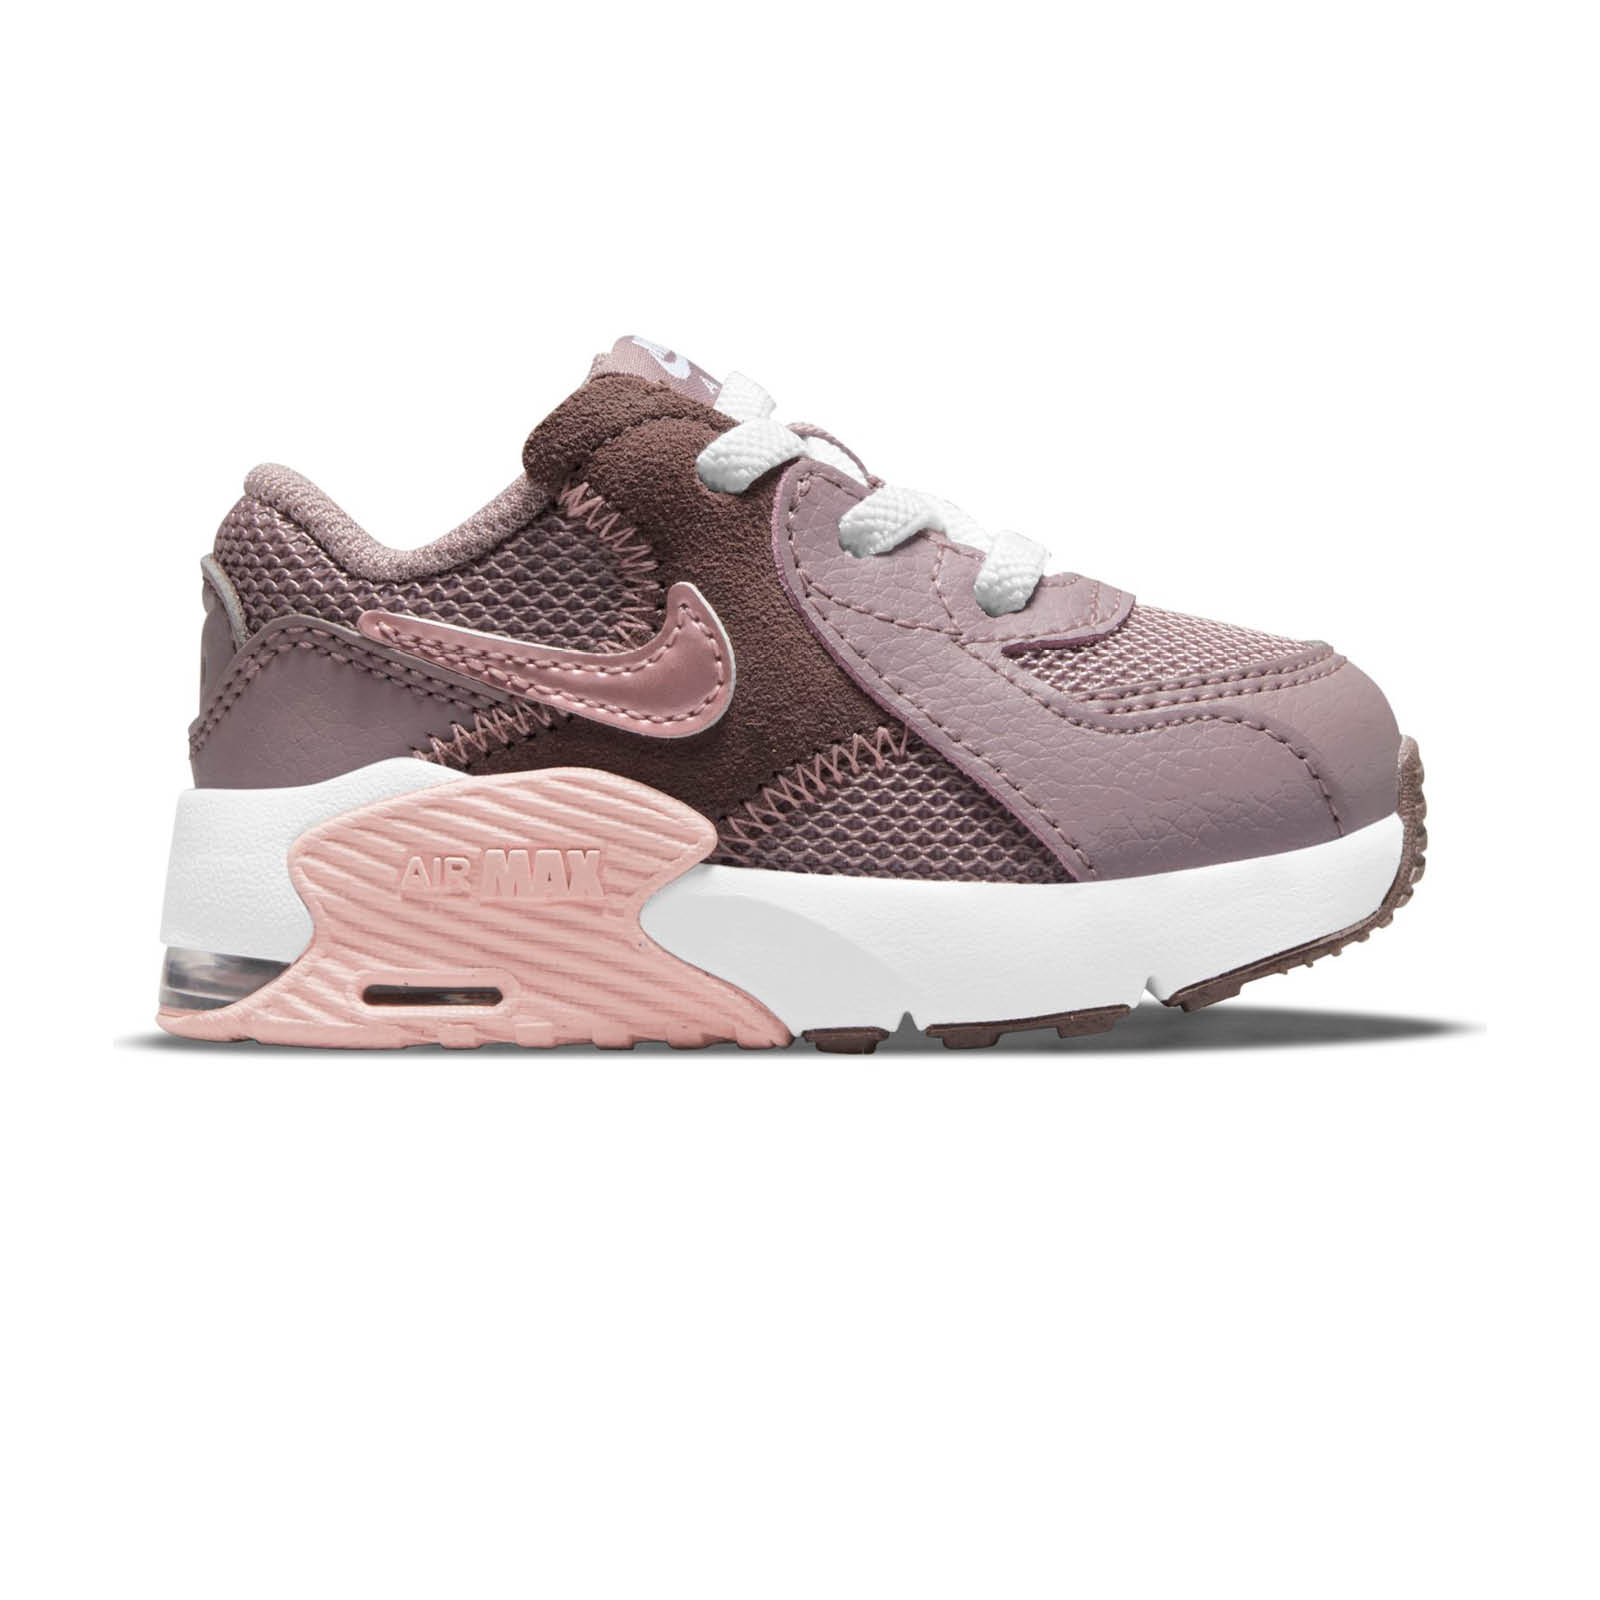 Nike - NIKE AIR MAX EXCEE (TD) - LT VIOLET ORE/PINK GLAZE-VIOLET ORE Παιδικά > Παπούτσια > Sneaker > Παπούτσι Low Cut